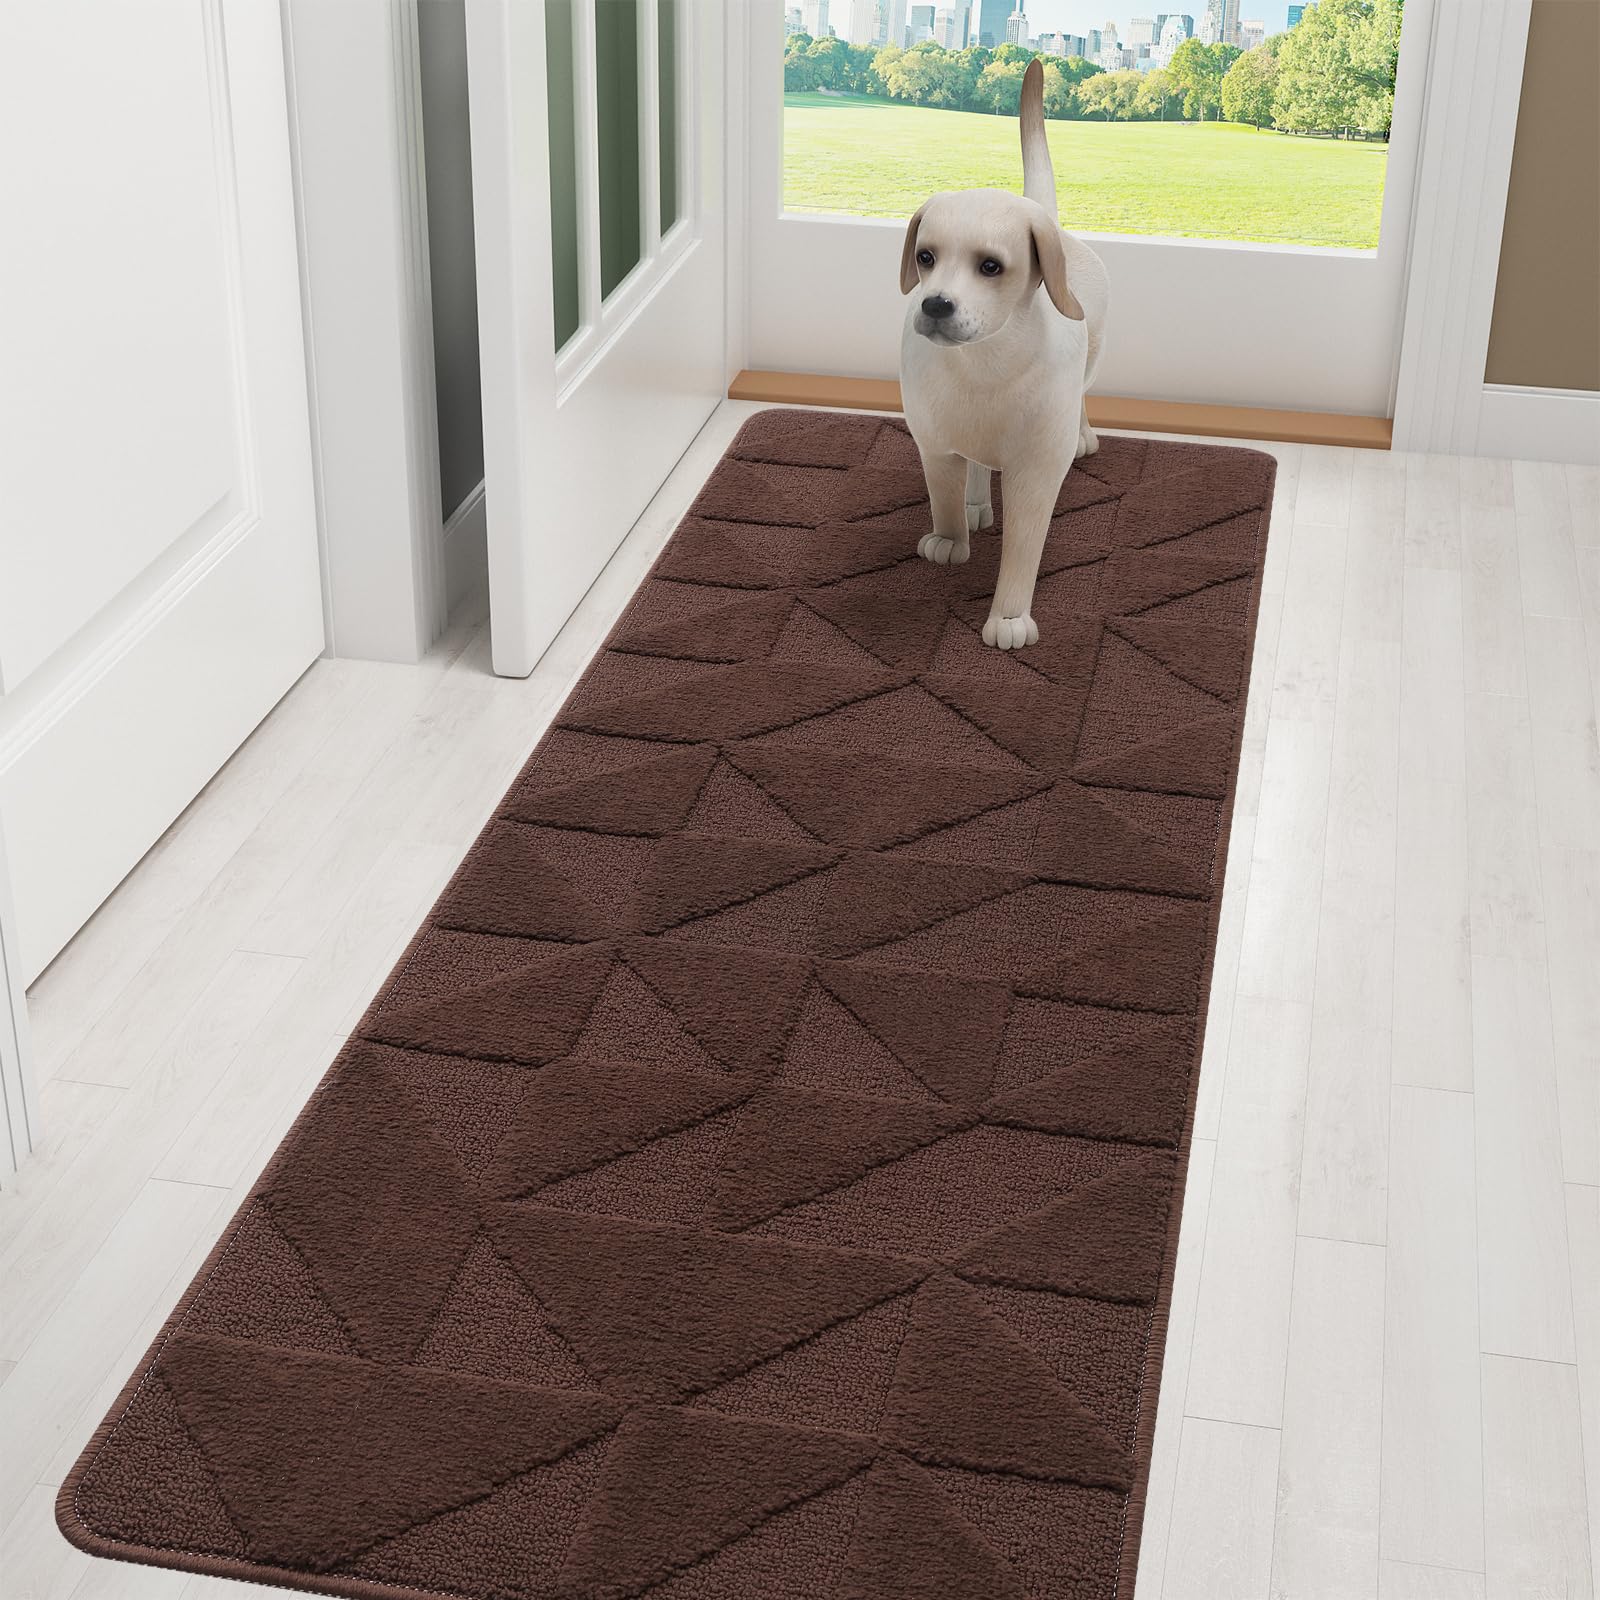 Olanly OLANLY Door Mats Indoor, Non-Slip, Absorbent, Dirt Resist, Entrance  Washable Mat, Low-Profile Inside Entry Doormat for Entryway